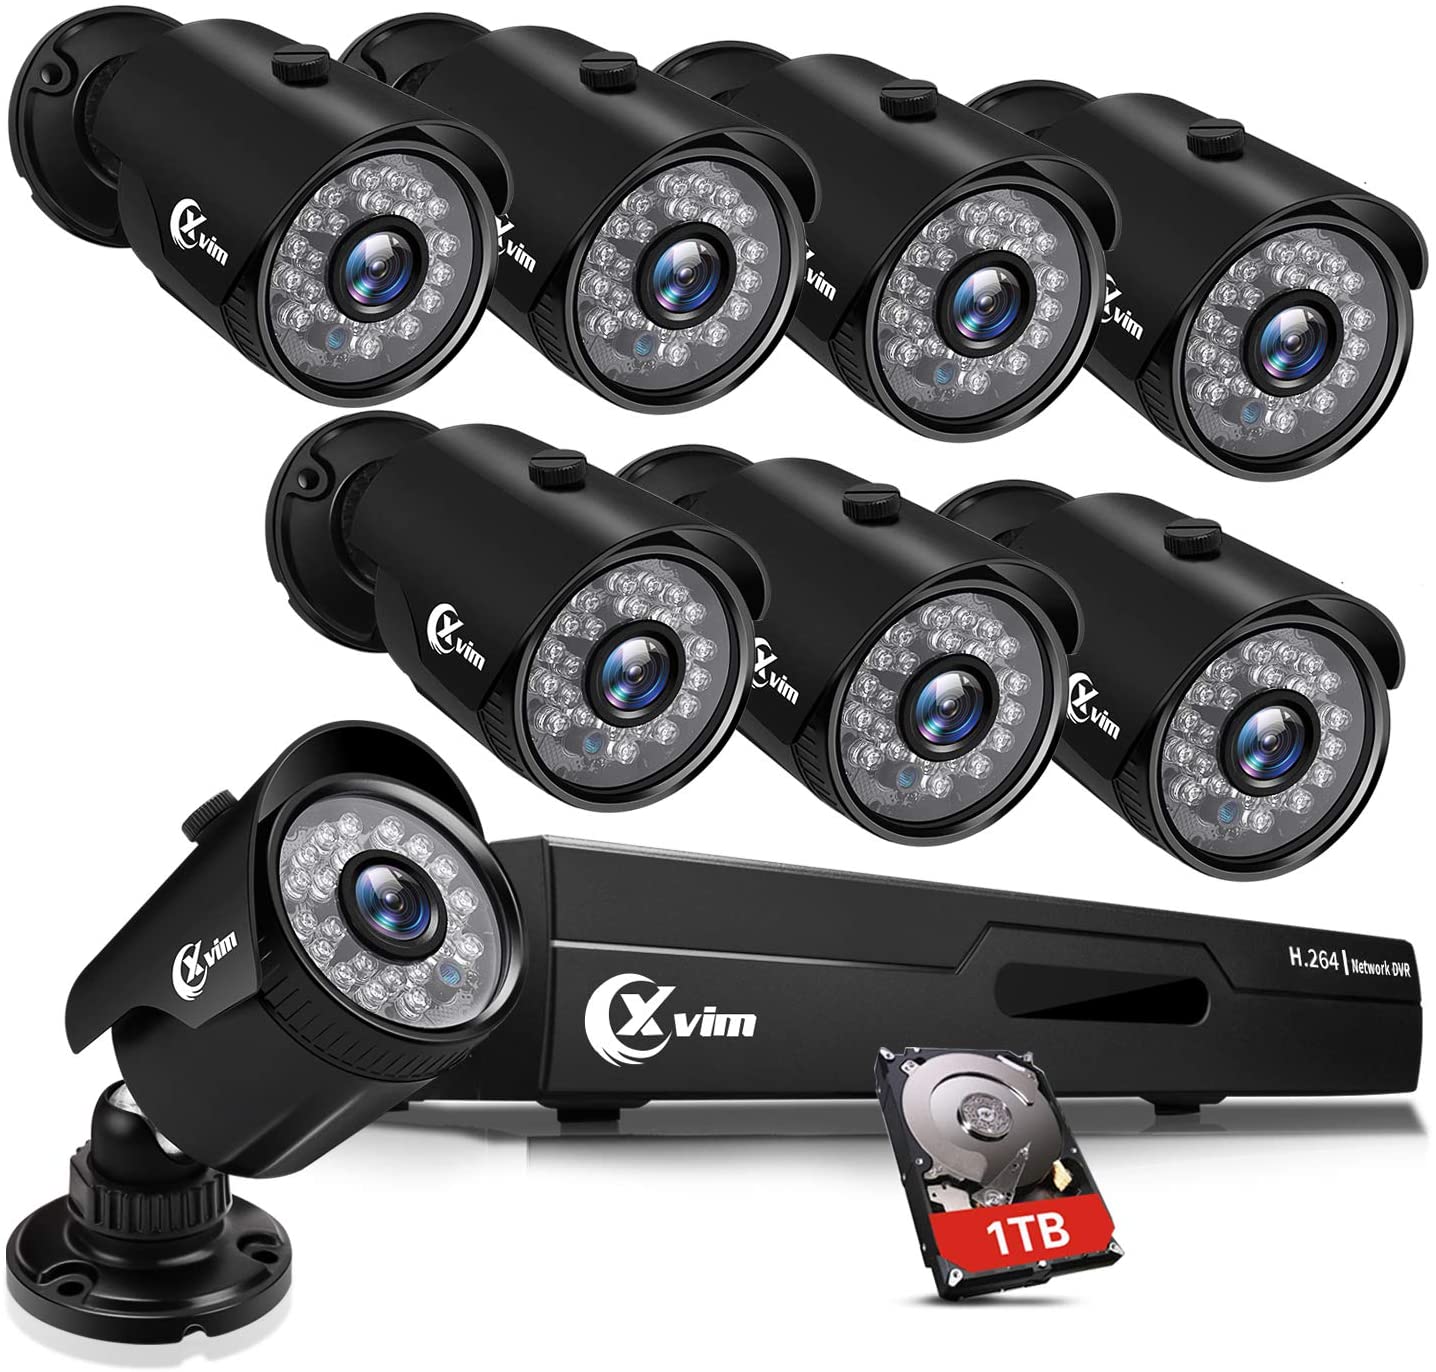 Review of XVIM 8CH 1080P Security Camera System Outdoor